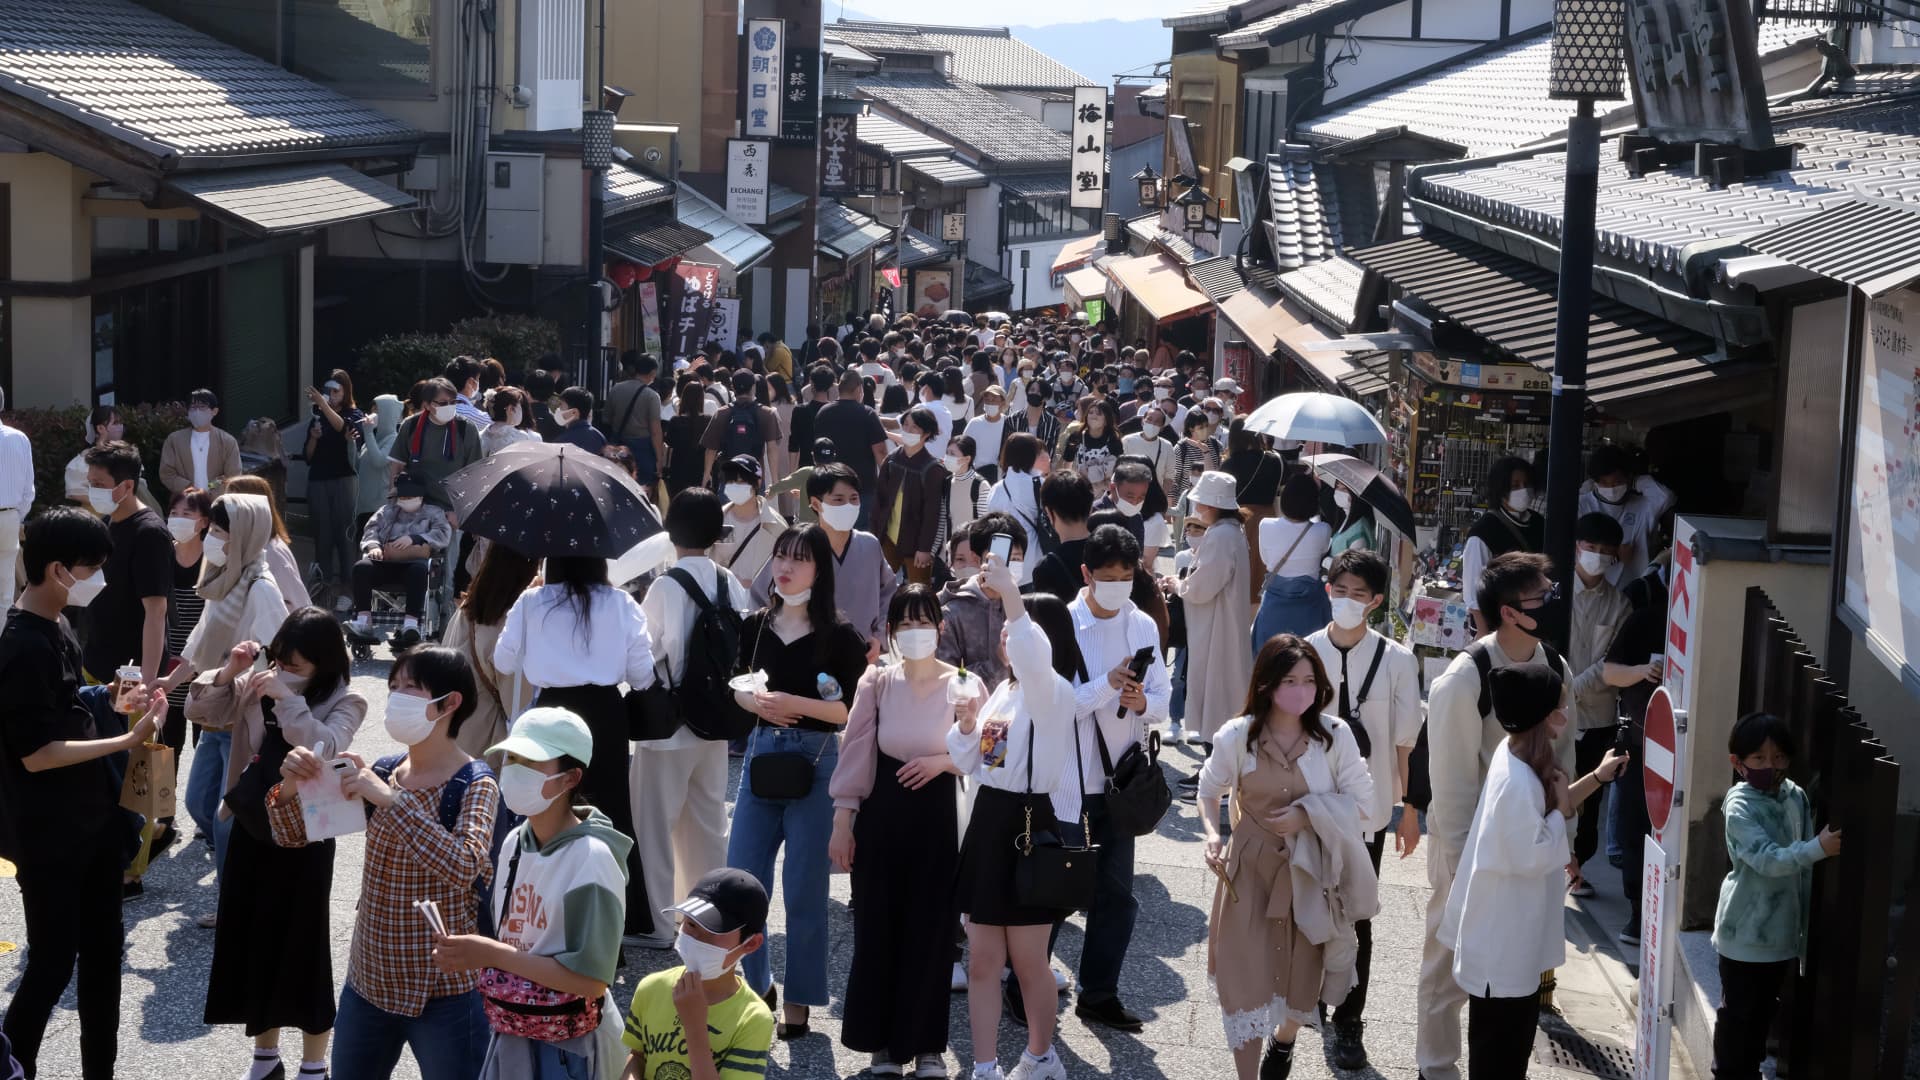 Japan is set to open its doors in June, but some locals aren't happy about it